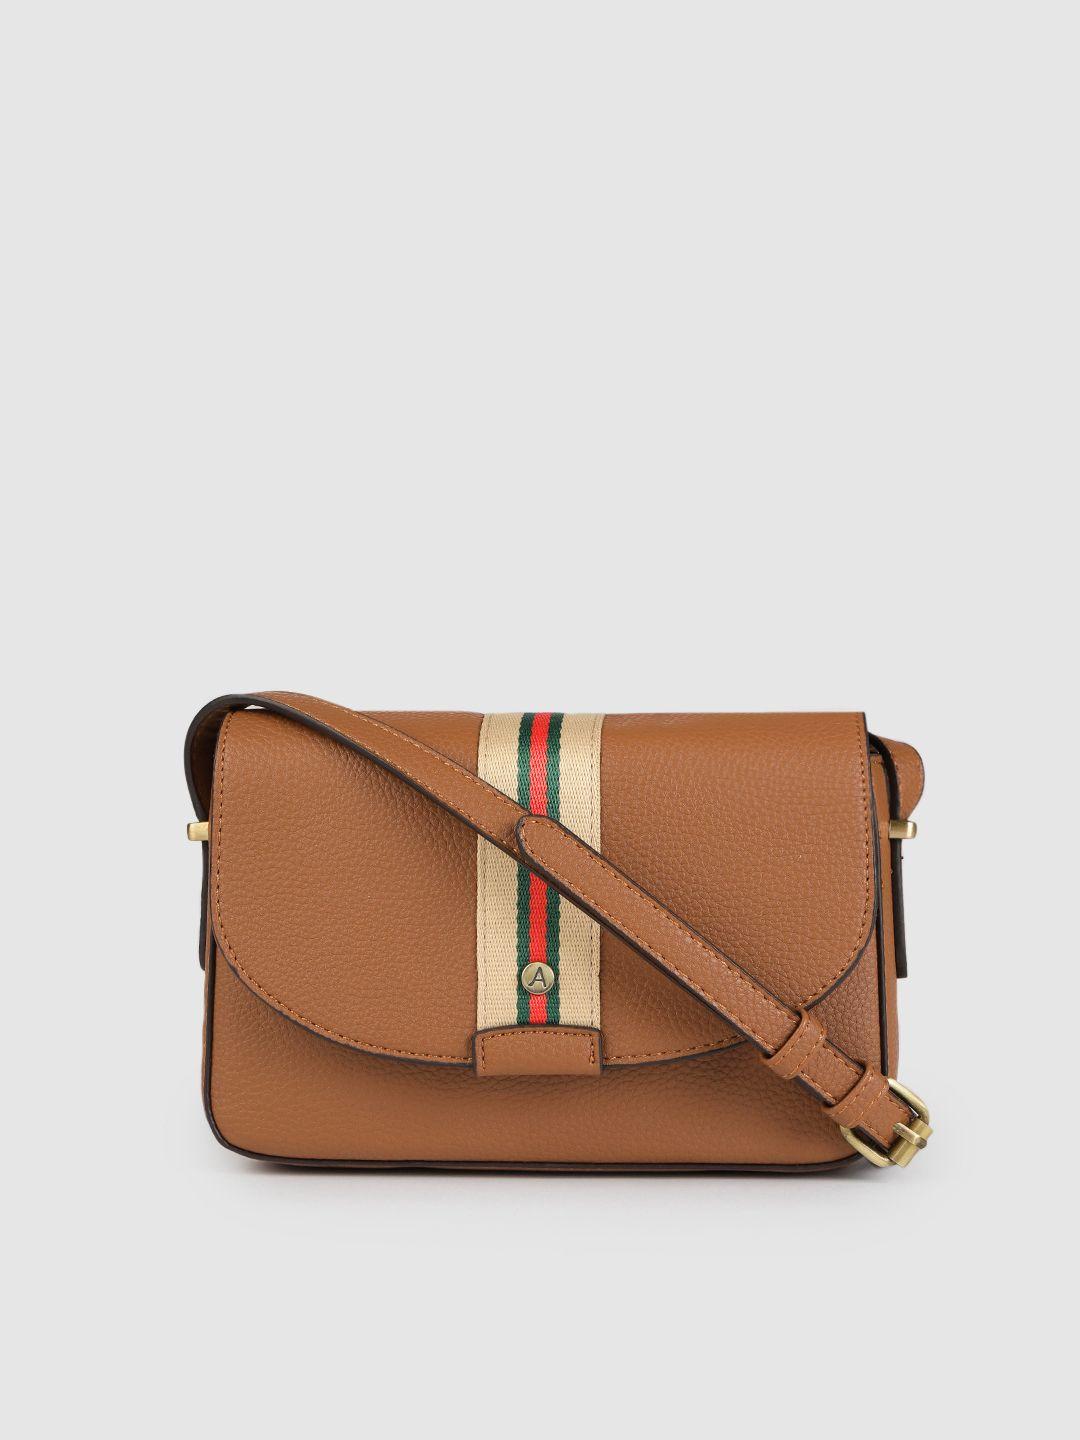 accessorize tan brown solid structured sling bag